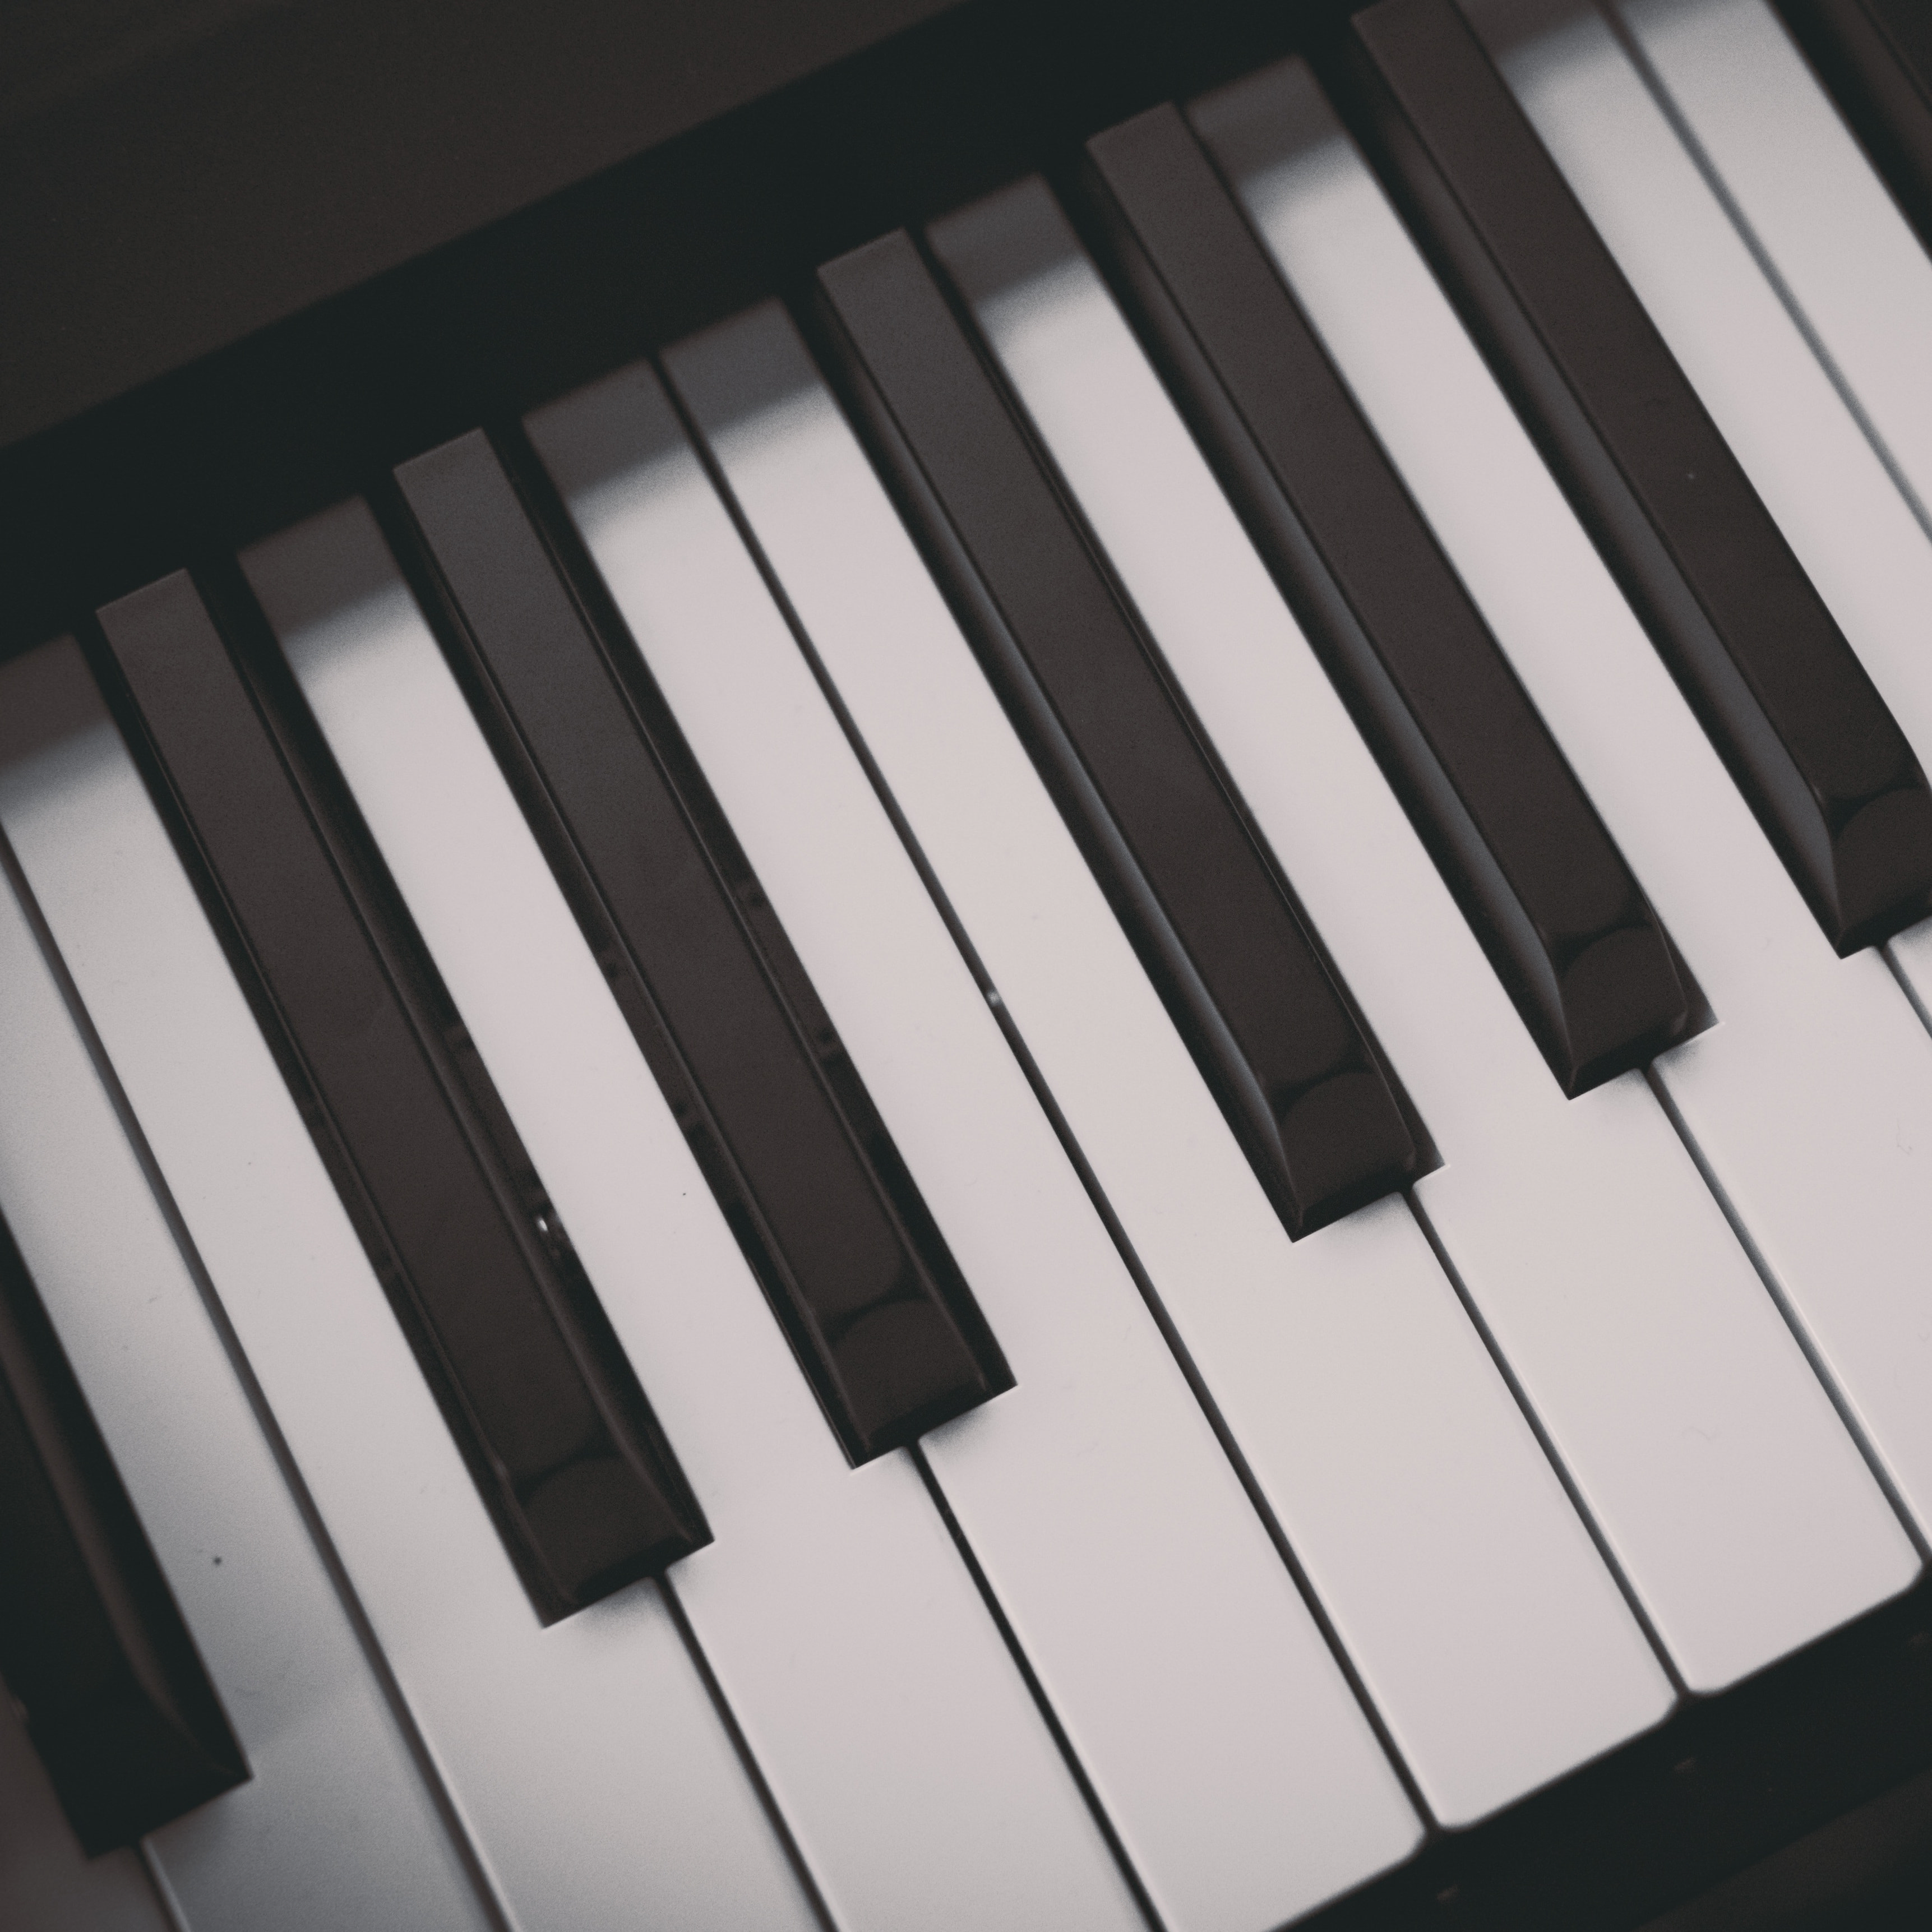 30 Relaxing Piano Melodies for Study, Deep Focus & Concentration